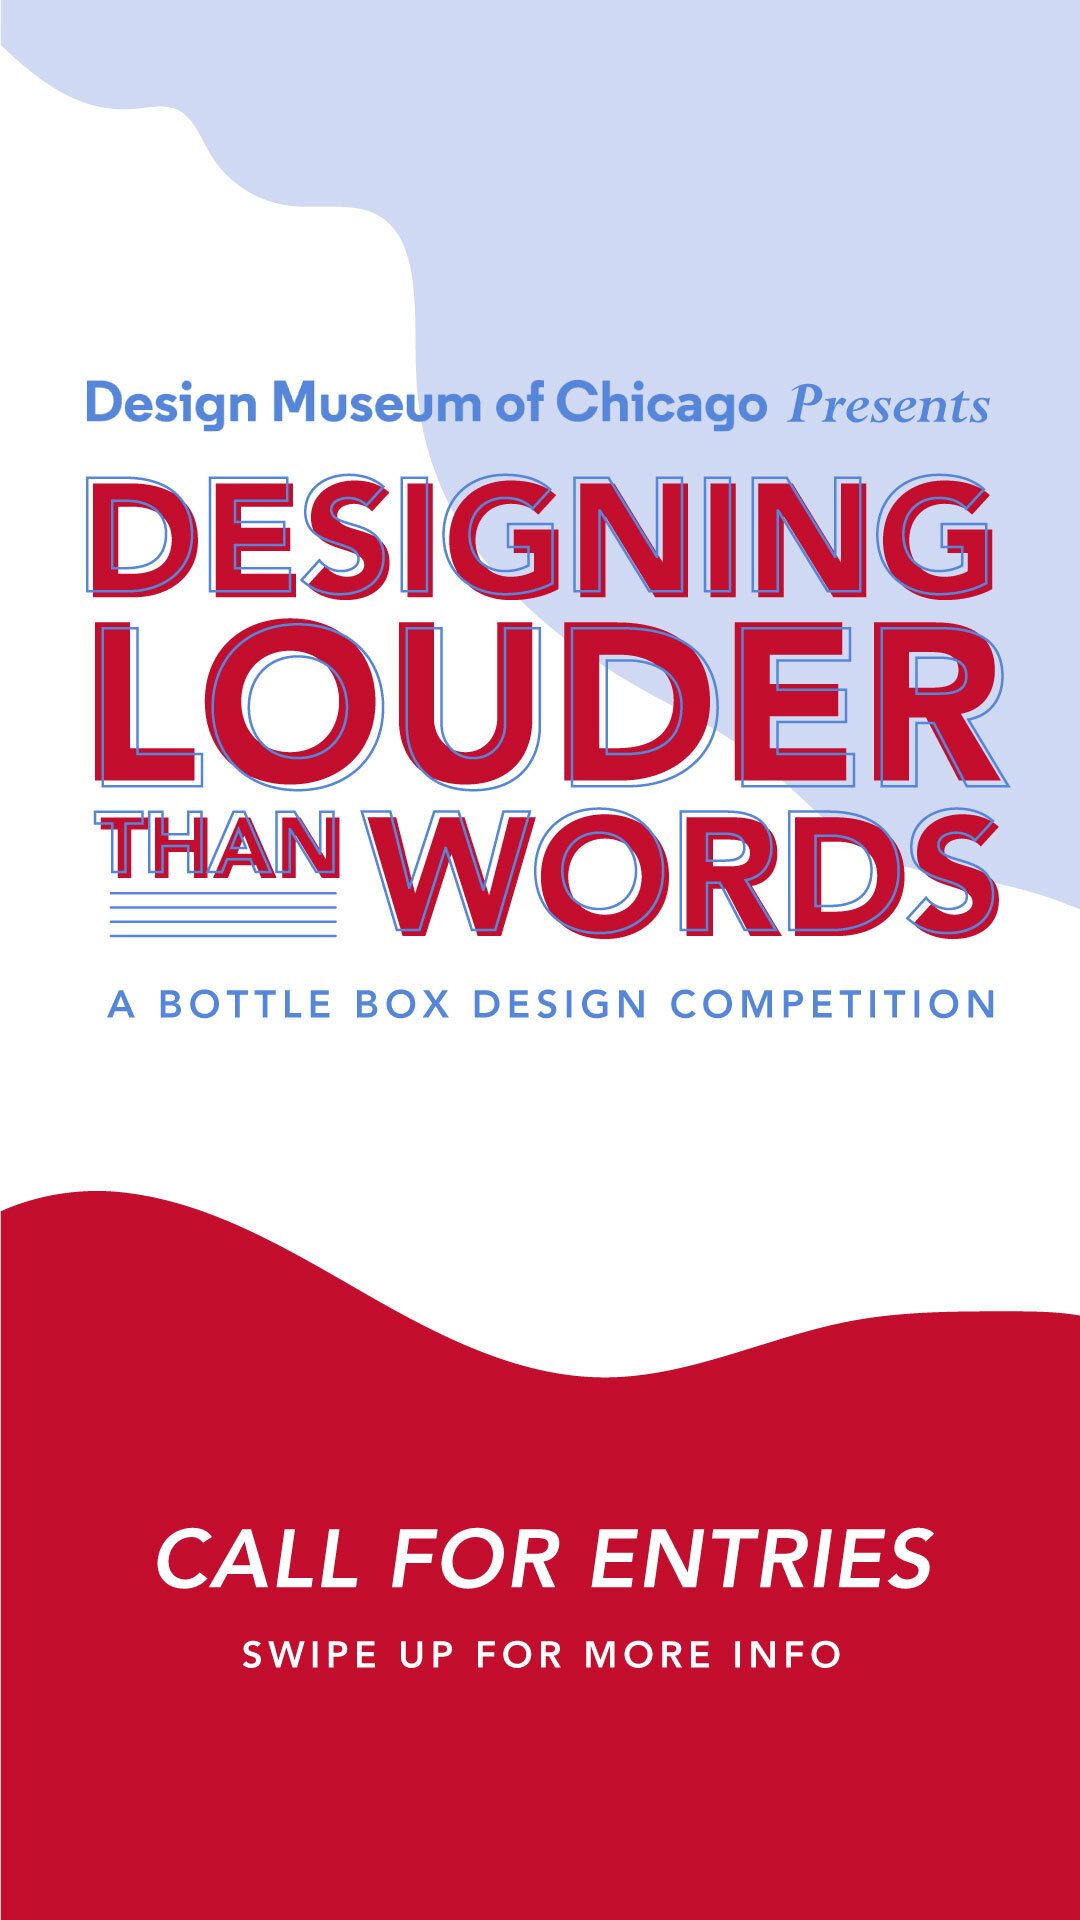  Designing Louder than Words Call for Entries graphic with abstract cloud shapes of blue and red.  